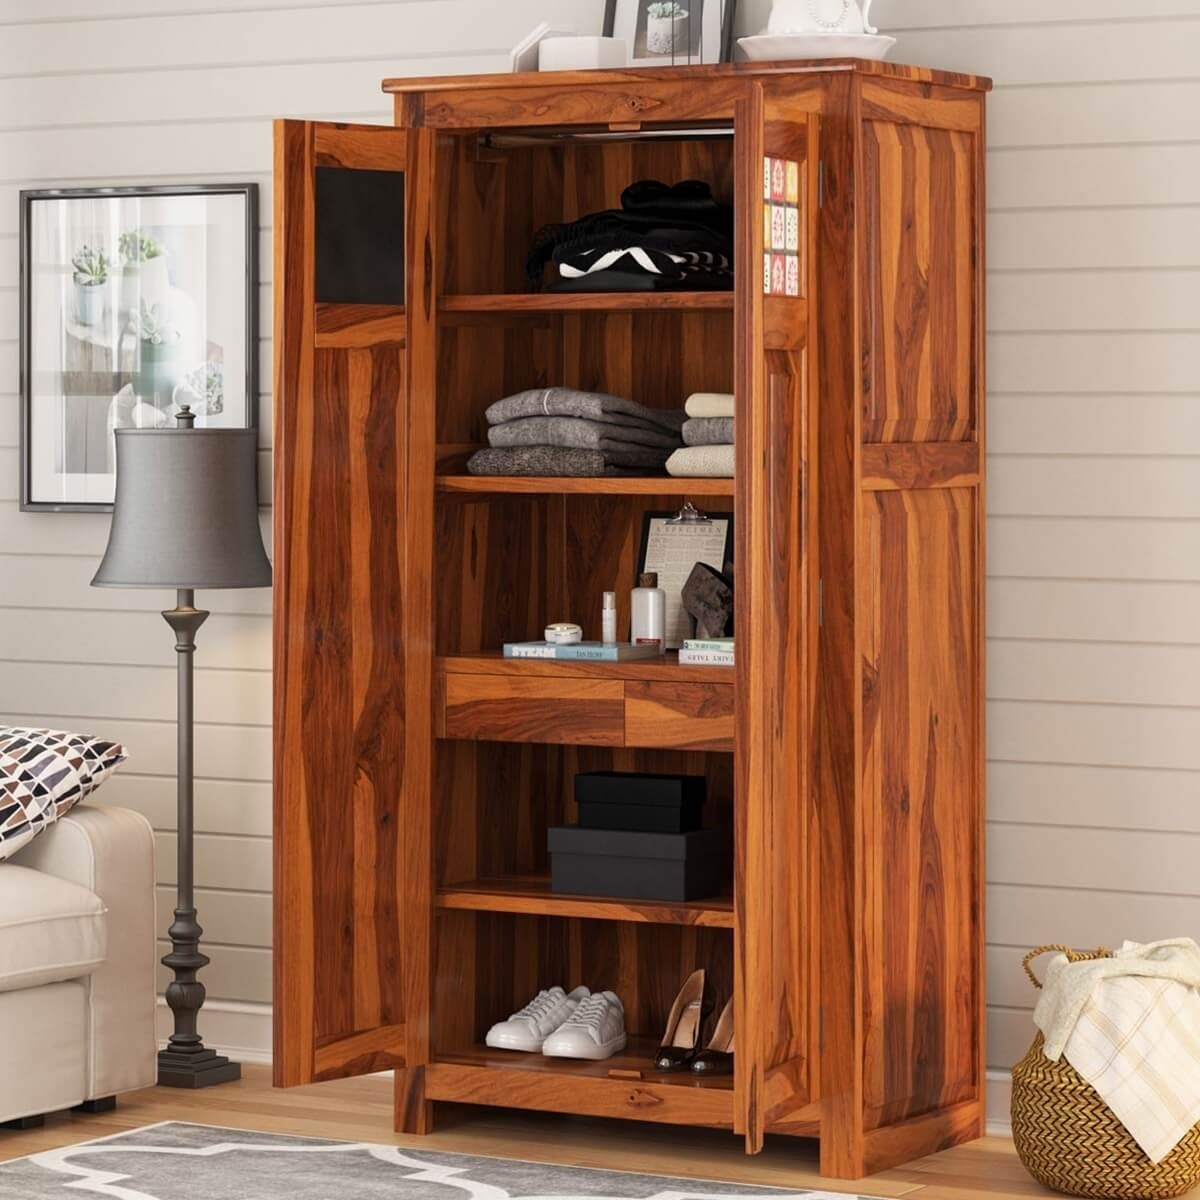 Elba rustic solid wood wardrobe armoire with shelves and 1